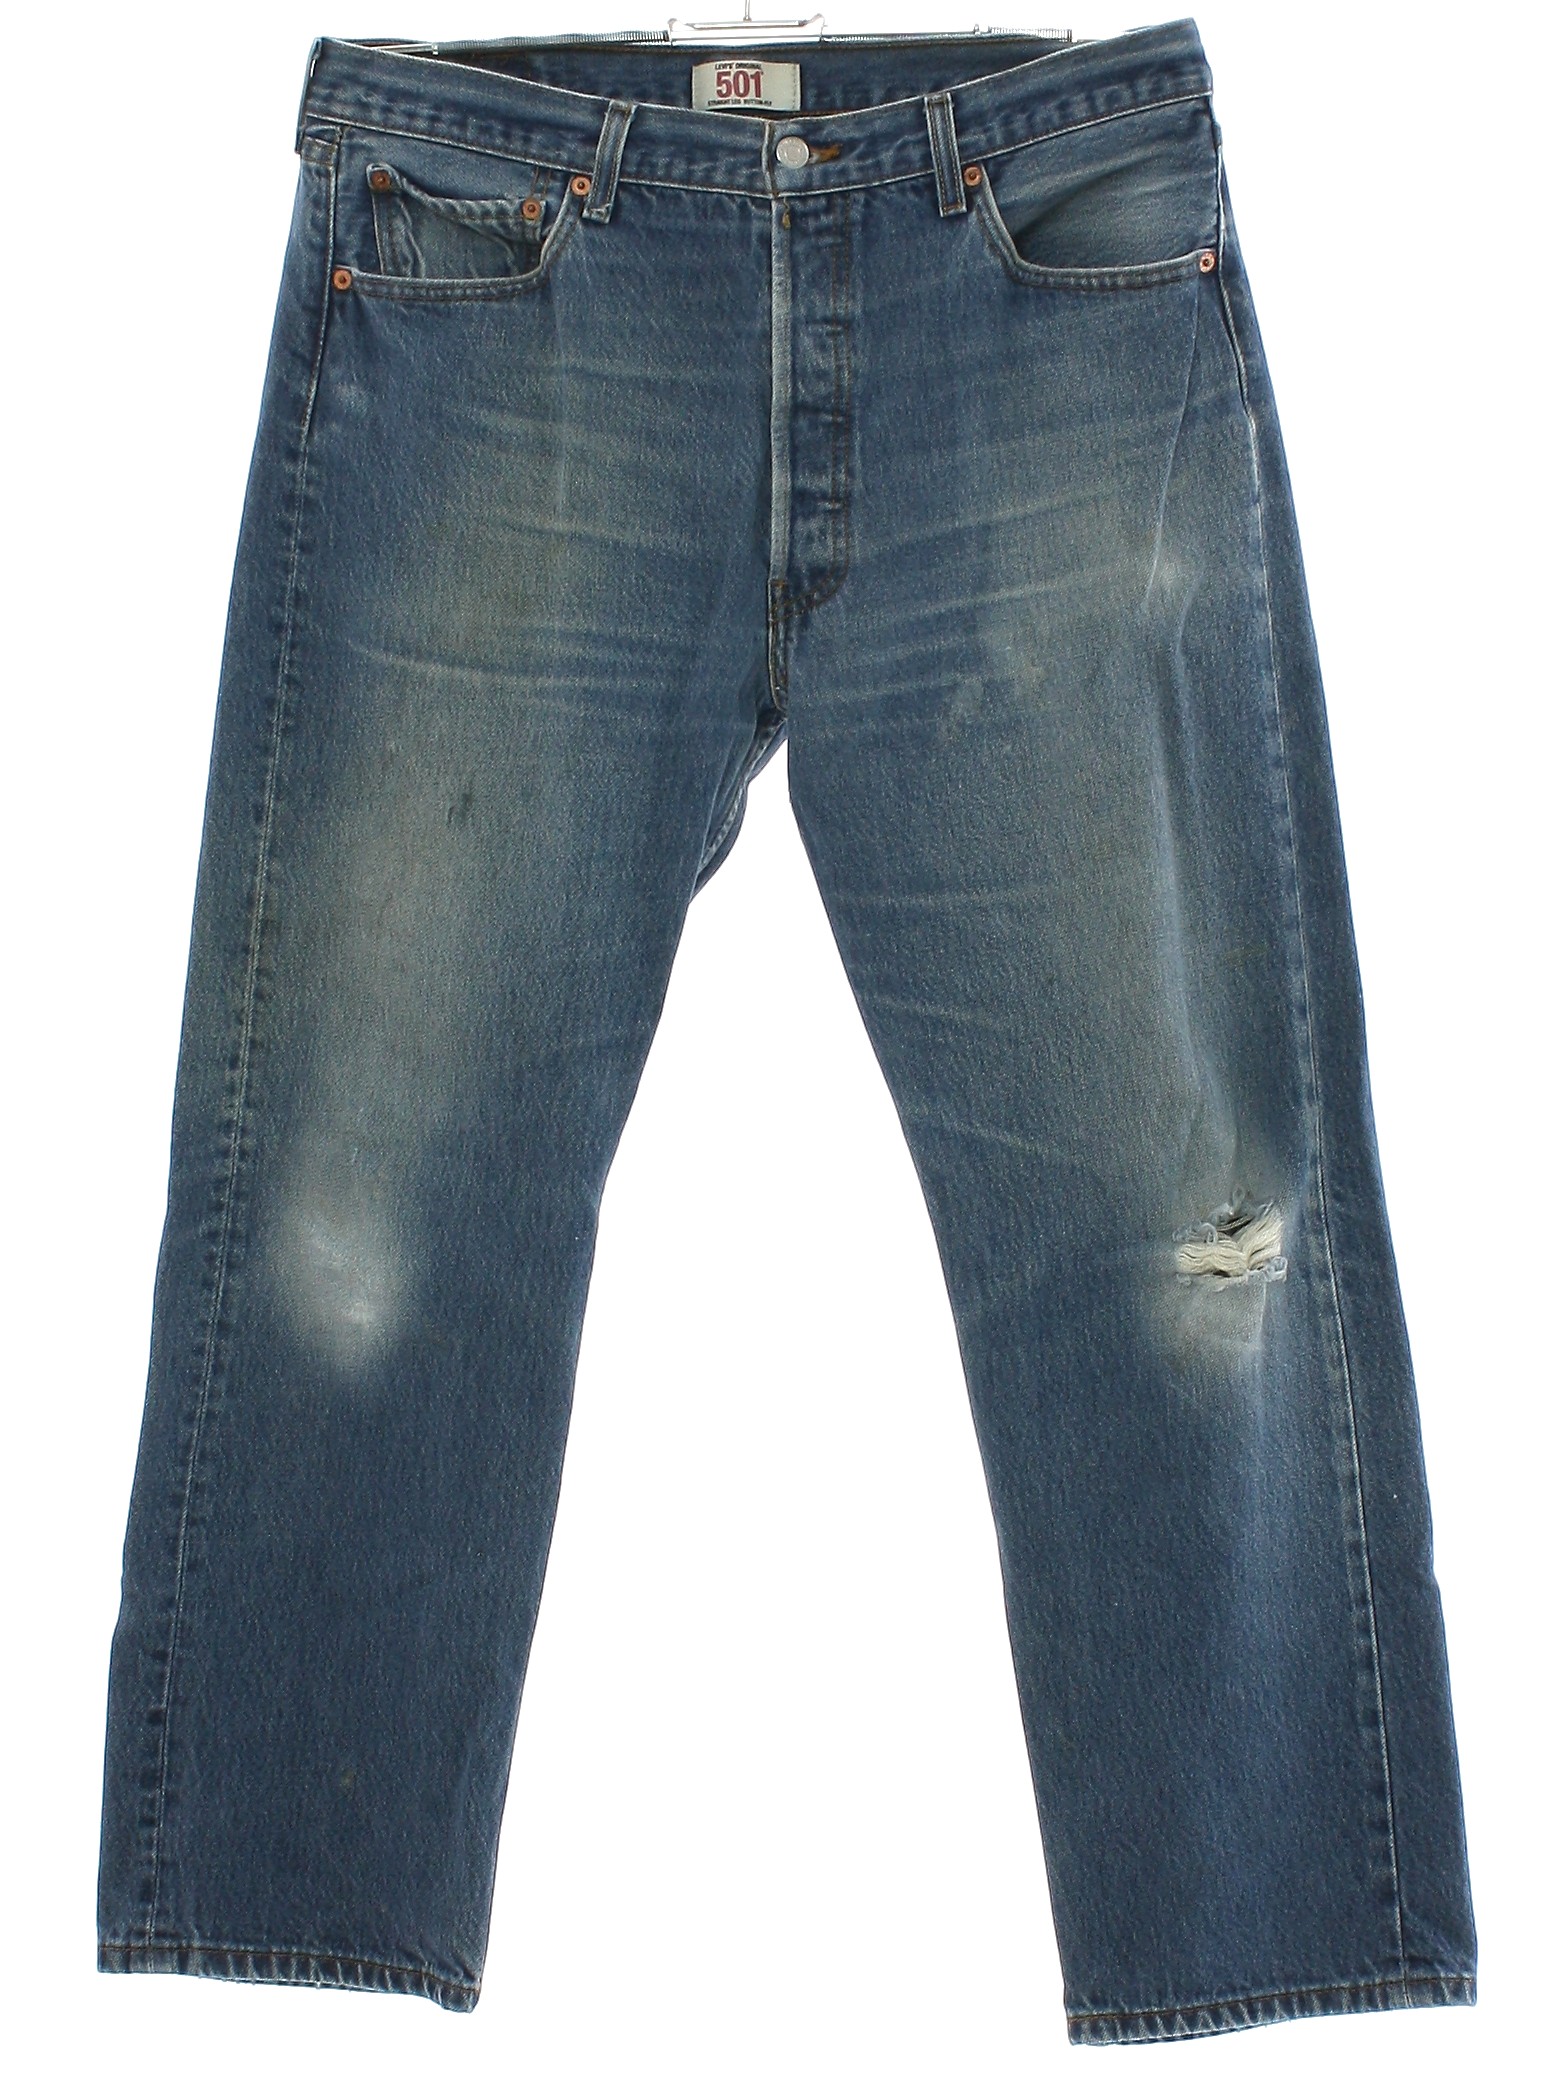 Pants: 90s (2008) -Levis 501s- Mens faded and worn blue cotton denim ...